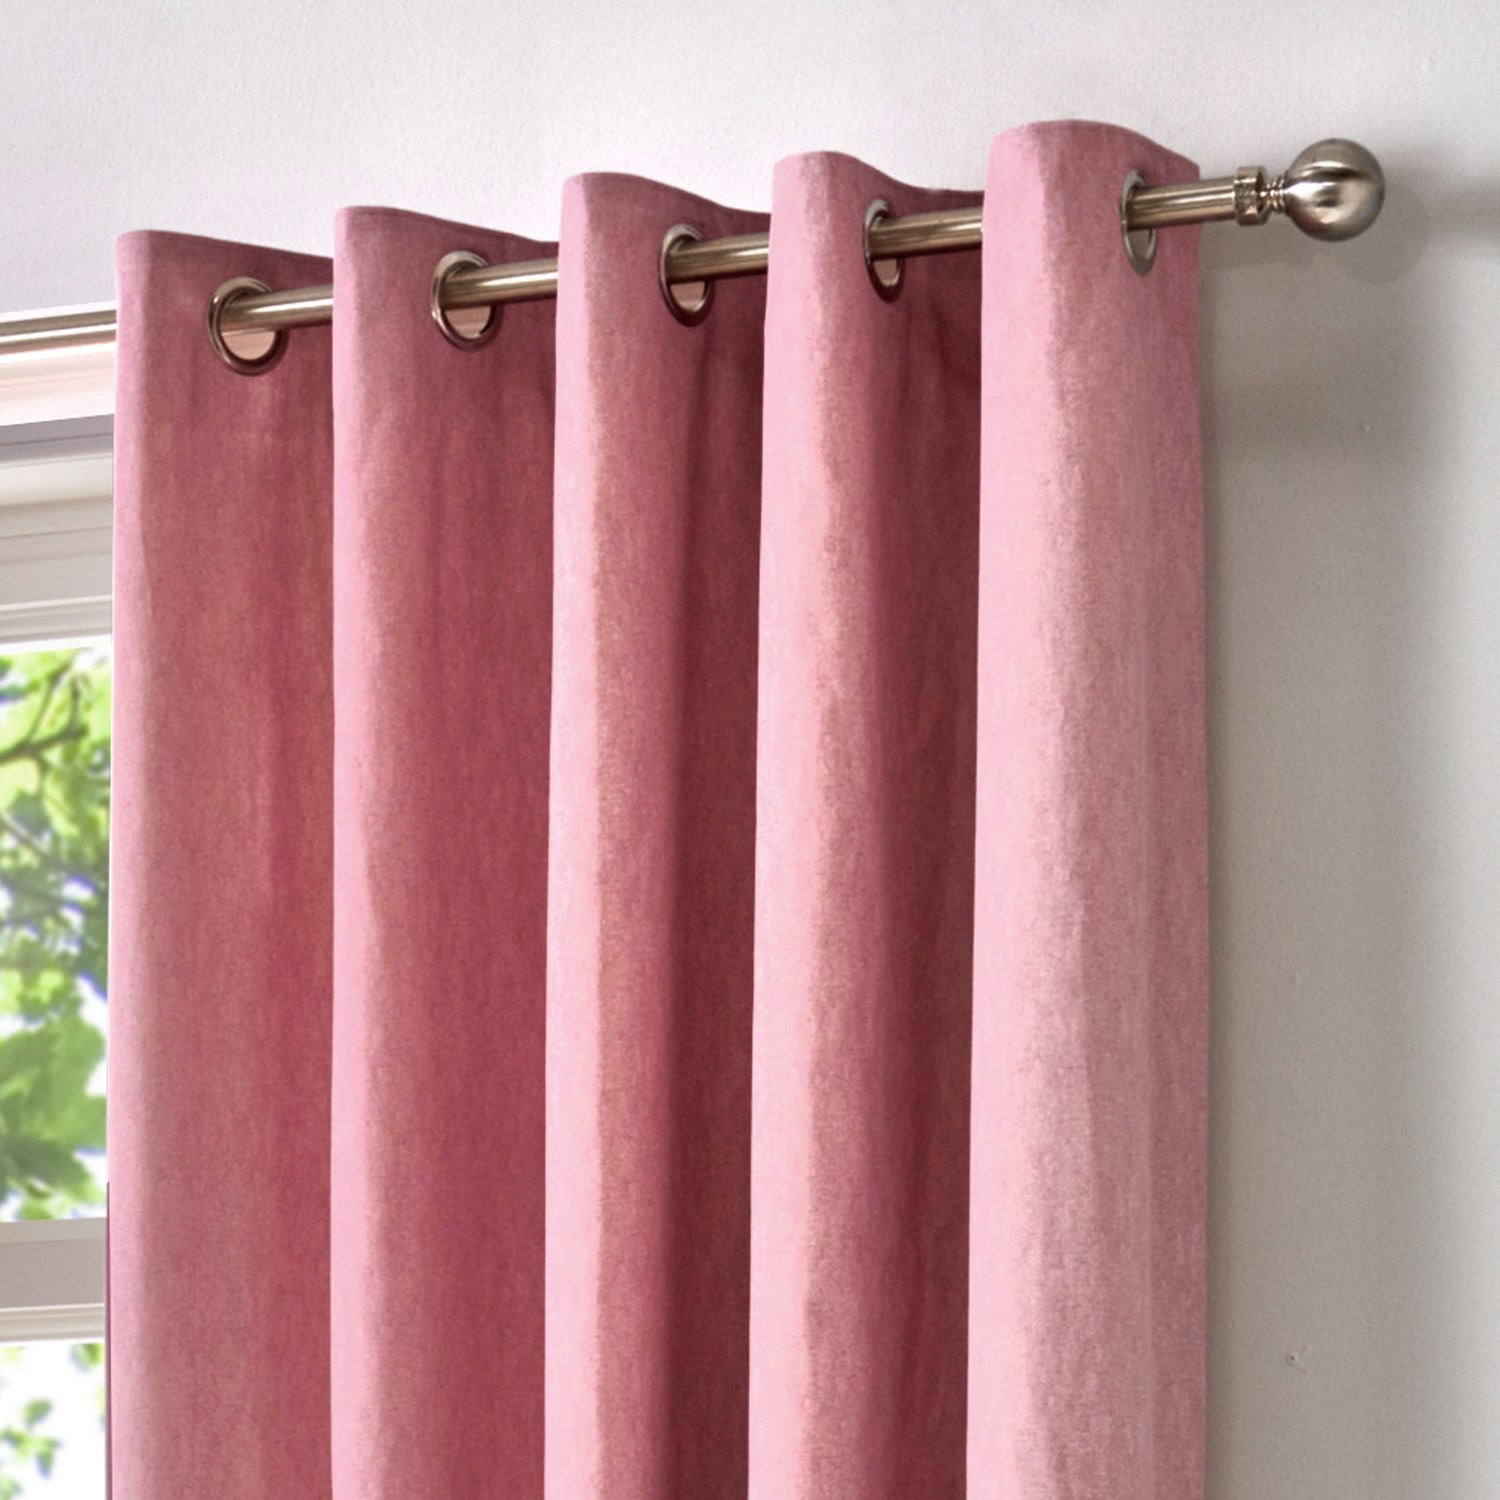 Sorbonne - 100% Cotton Pair of Eyelet Curtains in Blush - by Fusion